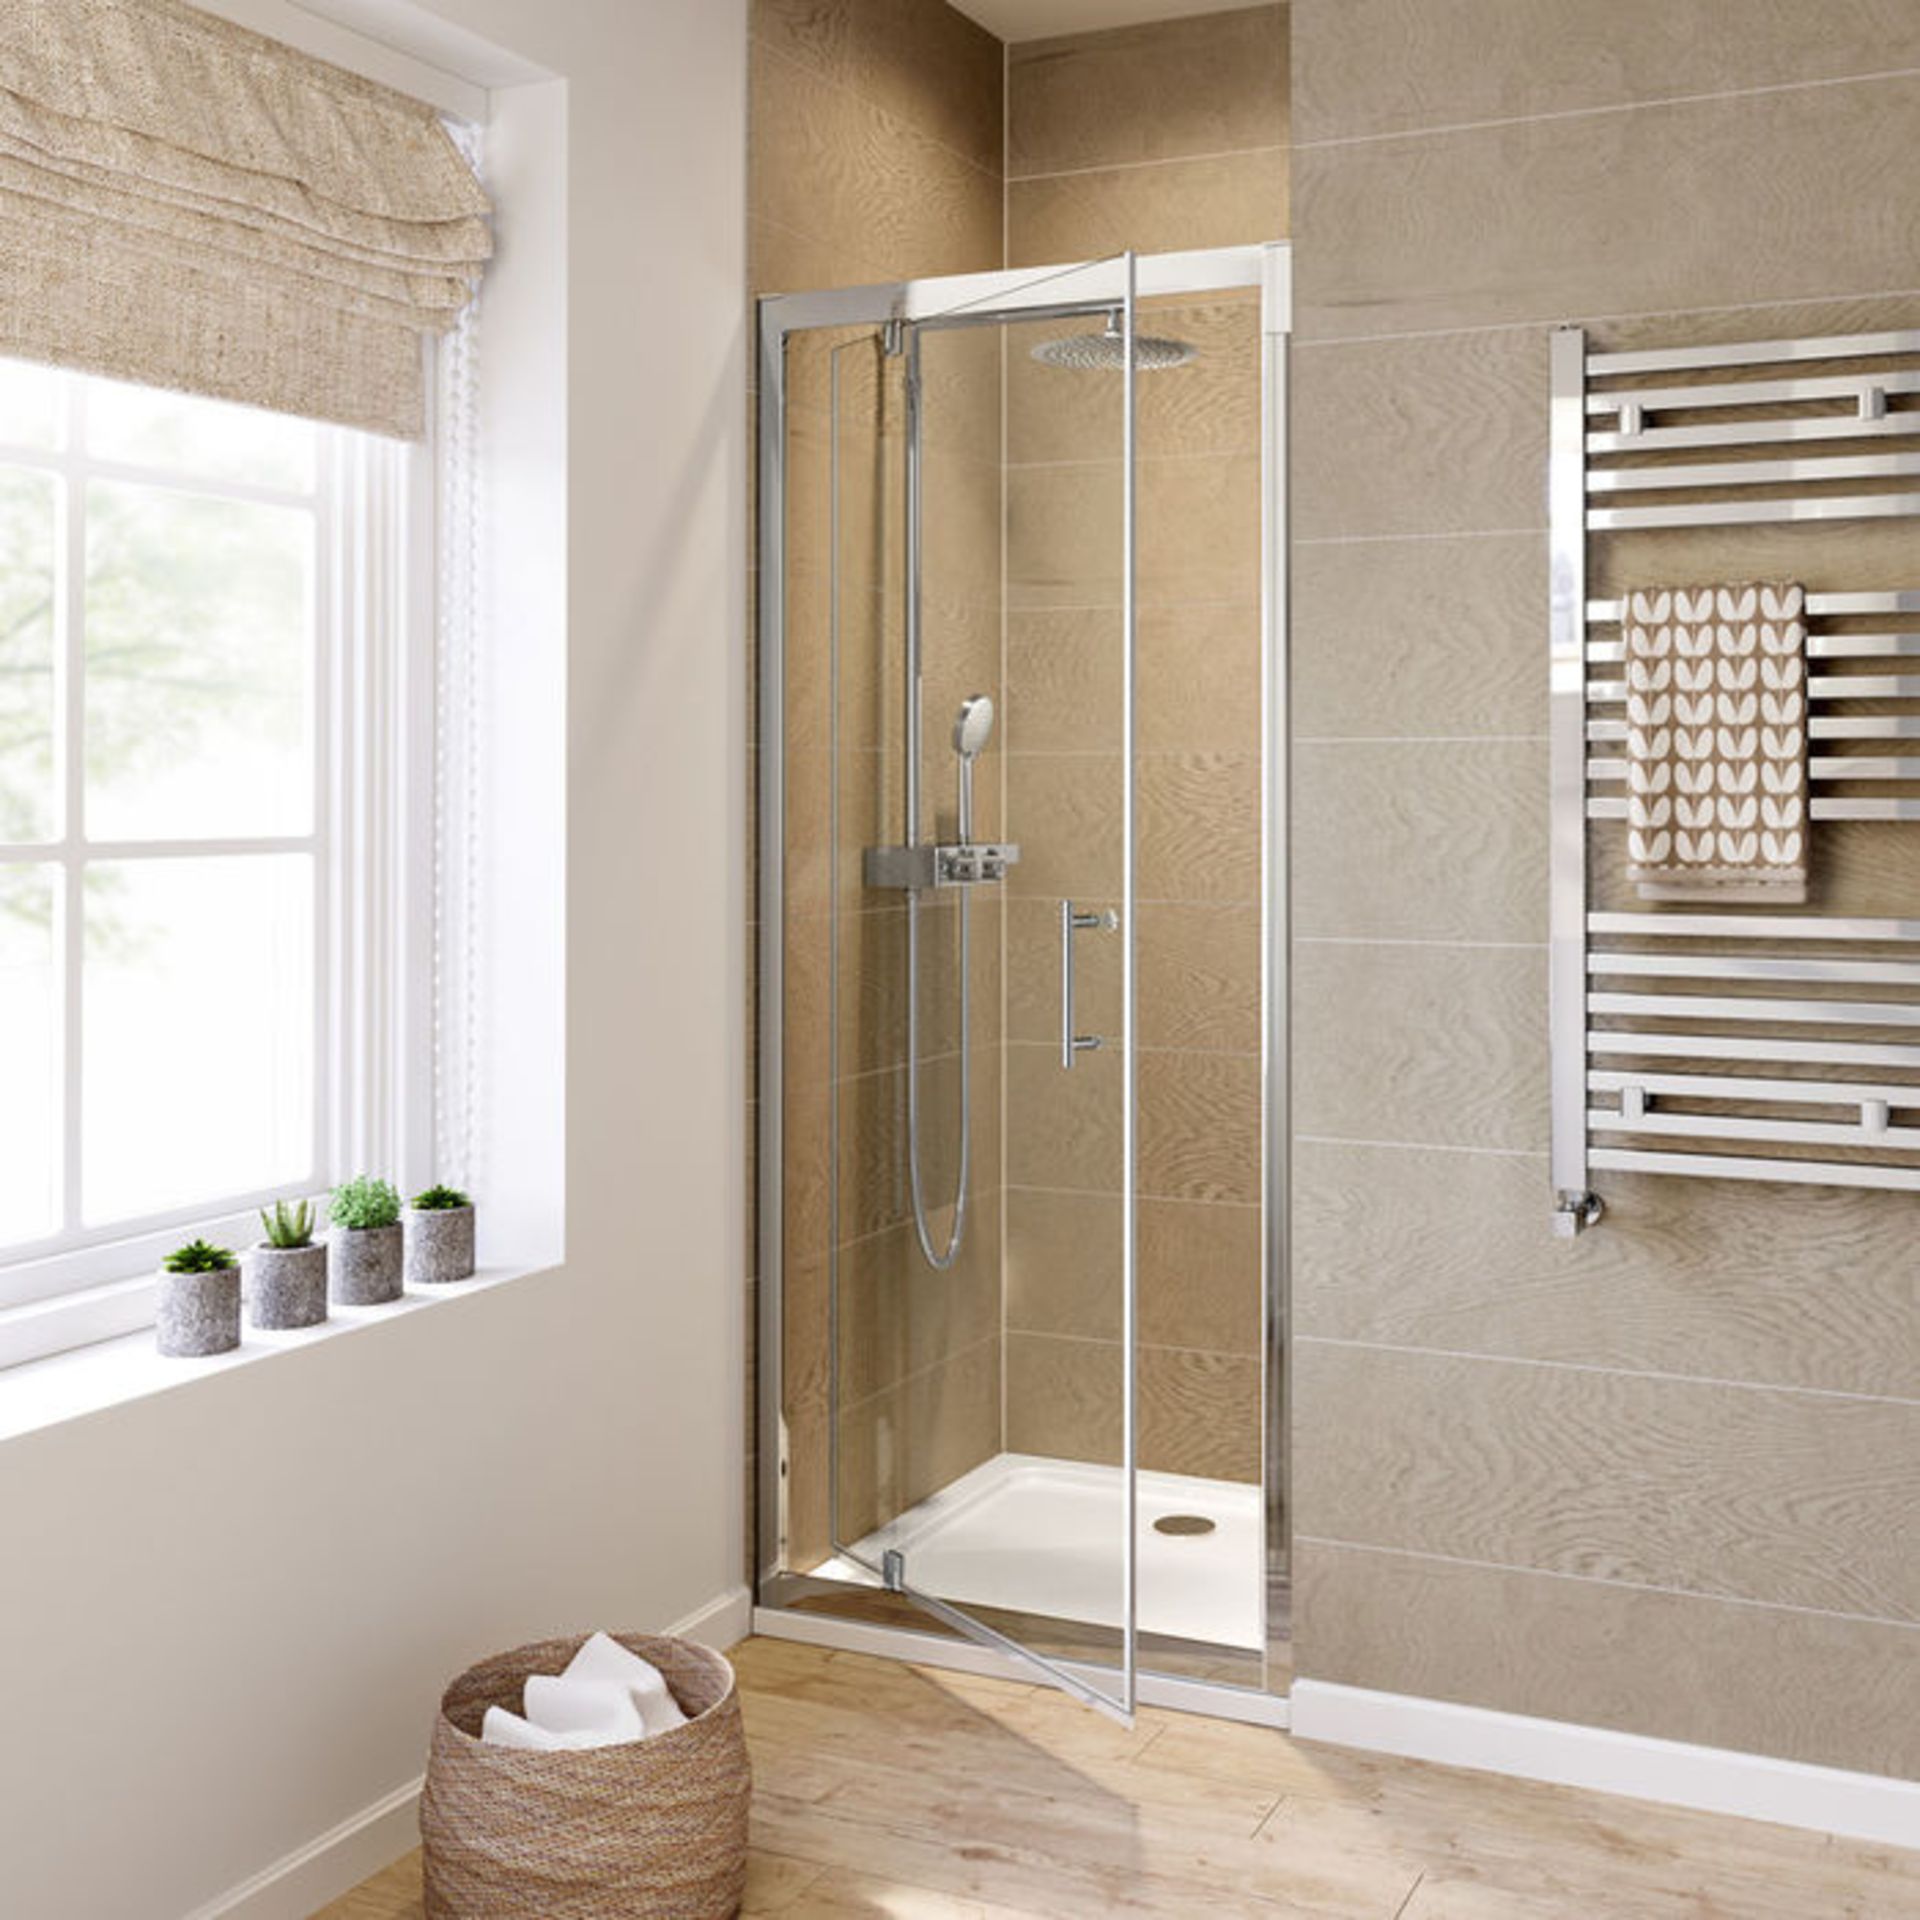 (VN106) 800mm - 6mm - Elements Pivot Shower Door. 6mm Safety Glass Fully waterproof tested - Image 2 of 4